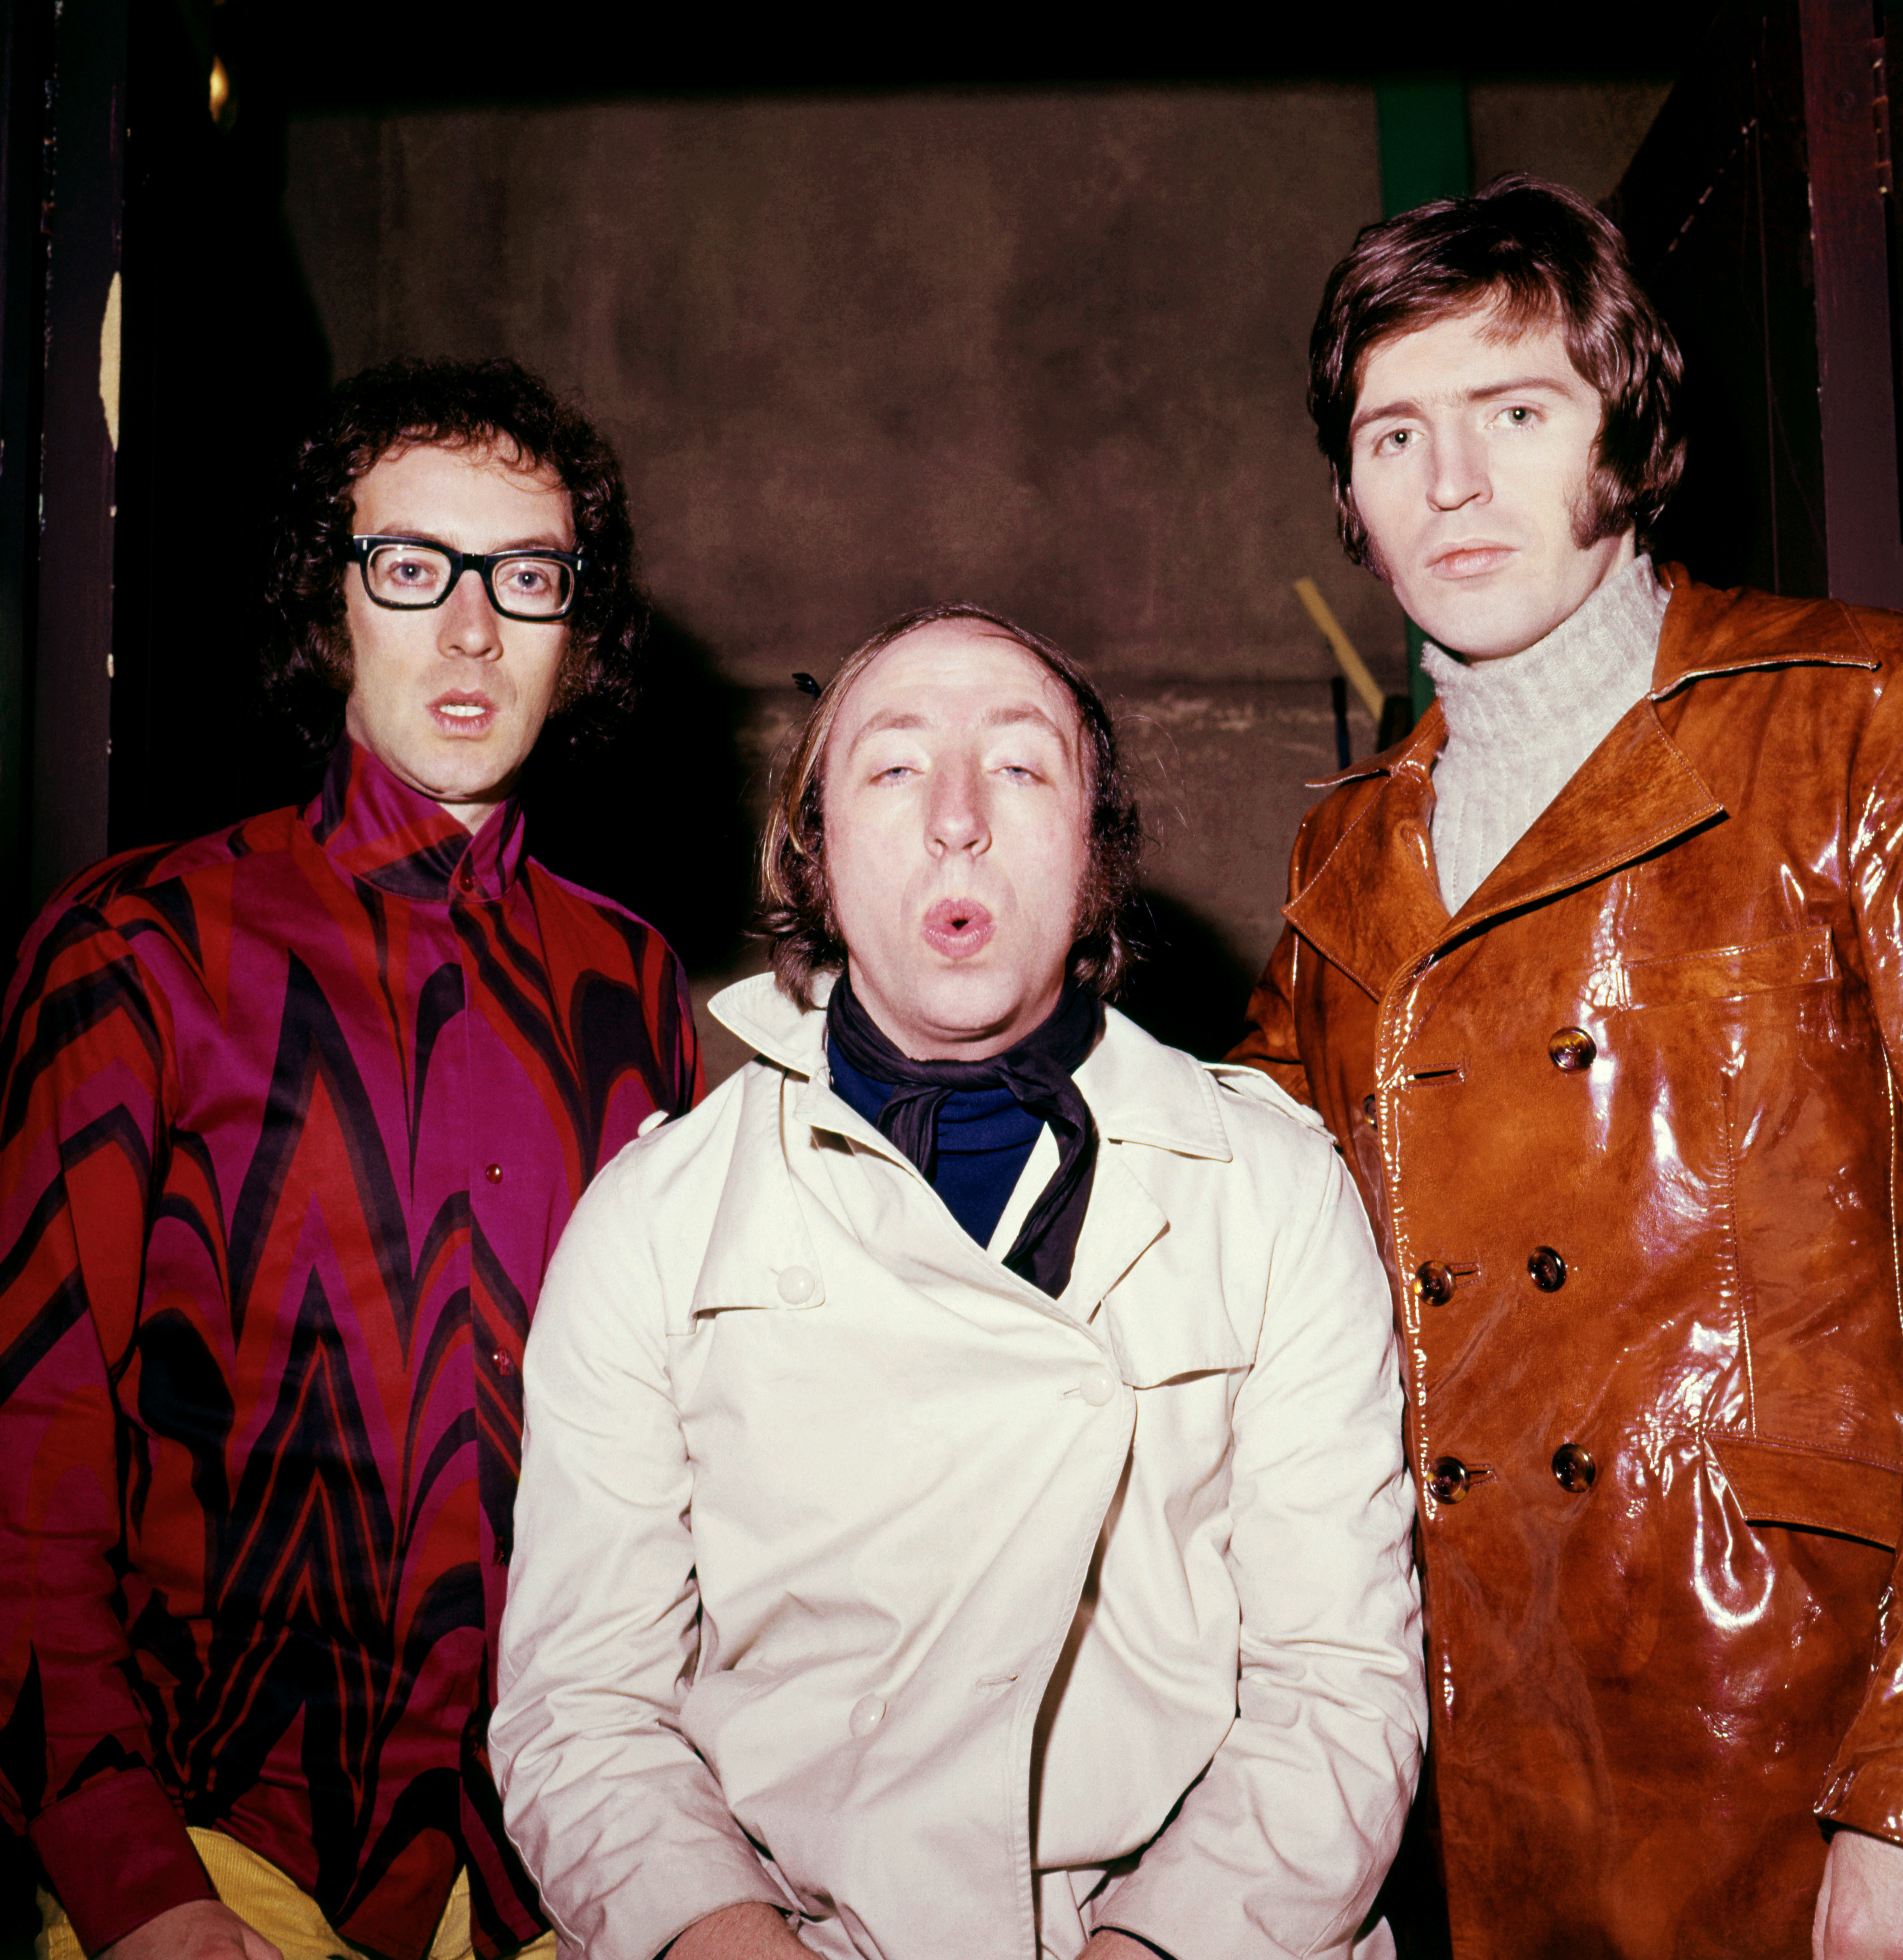 Members of the musical trio, The Scaffold, Roger McGough, John Gorman, and Michael McCartney in London, England in 1966 | Source: Getty Images